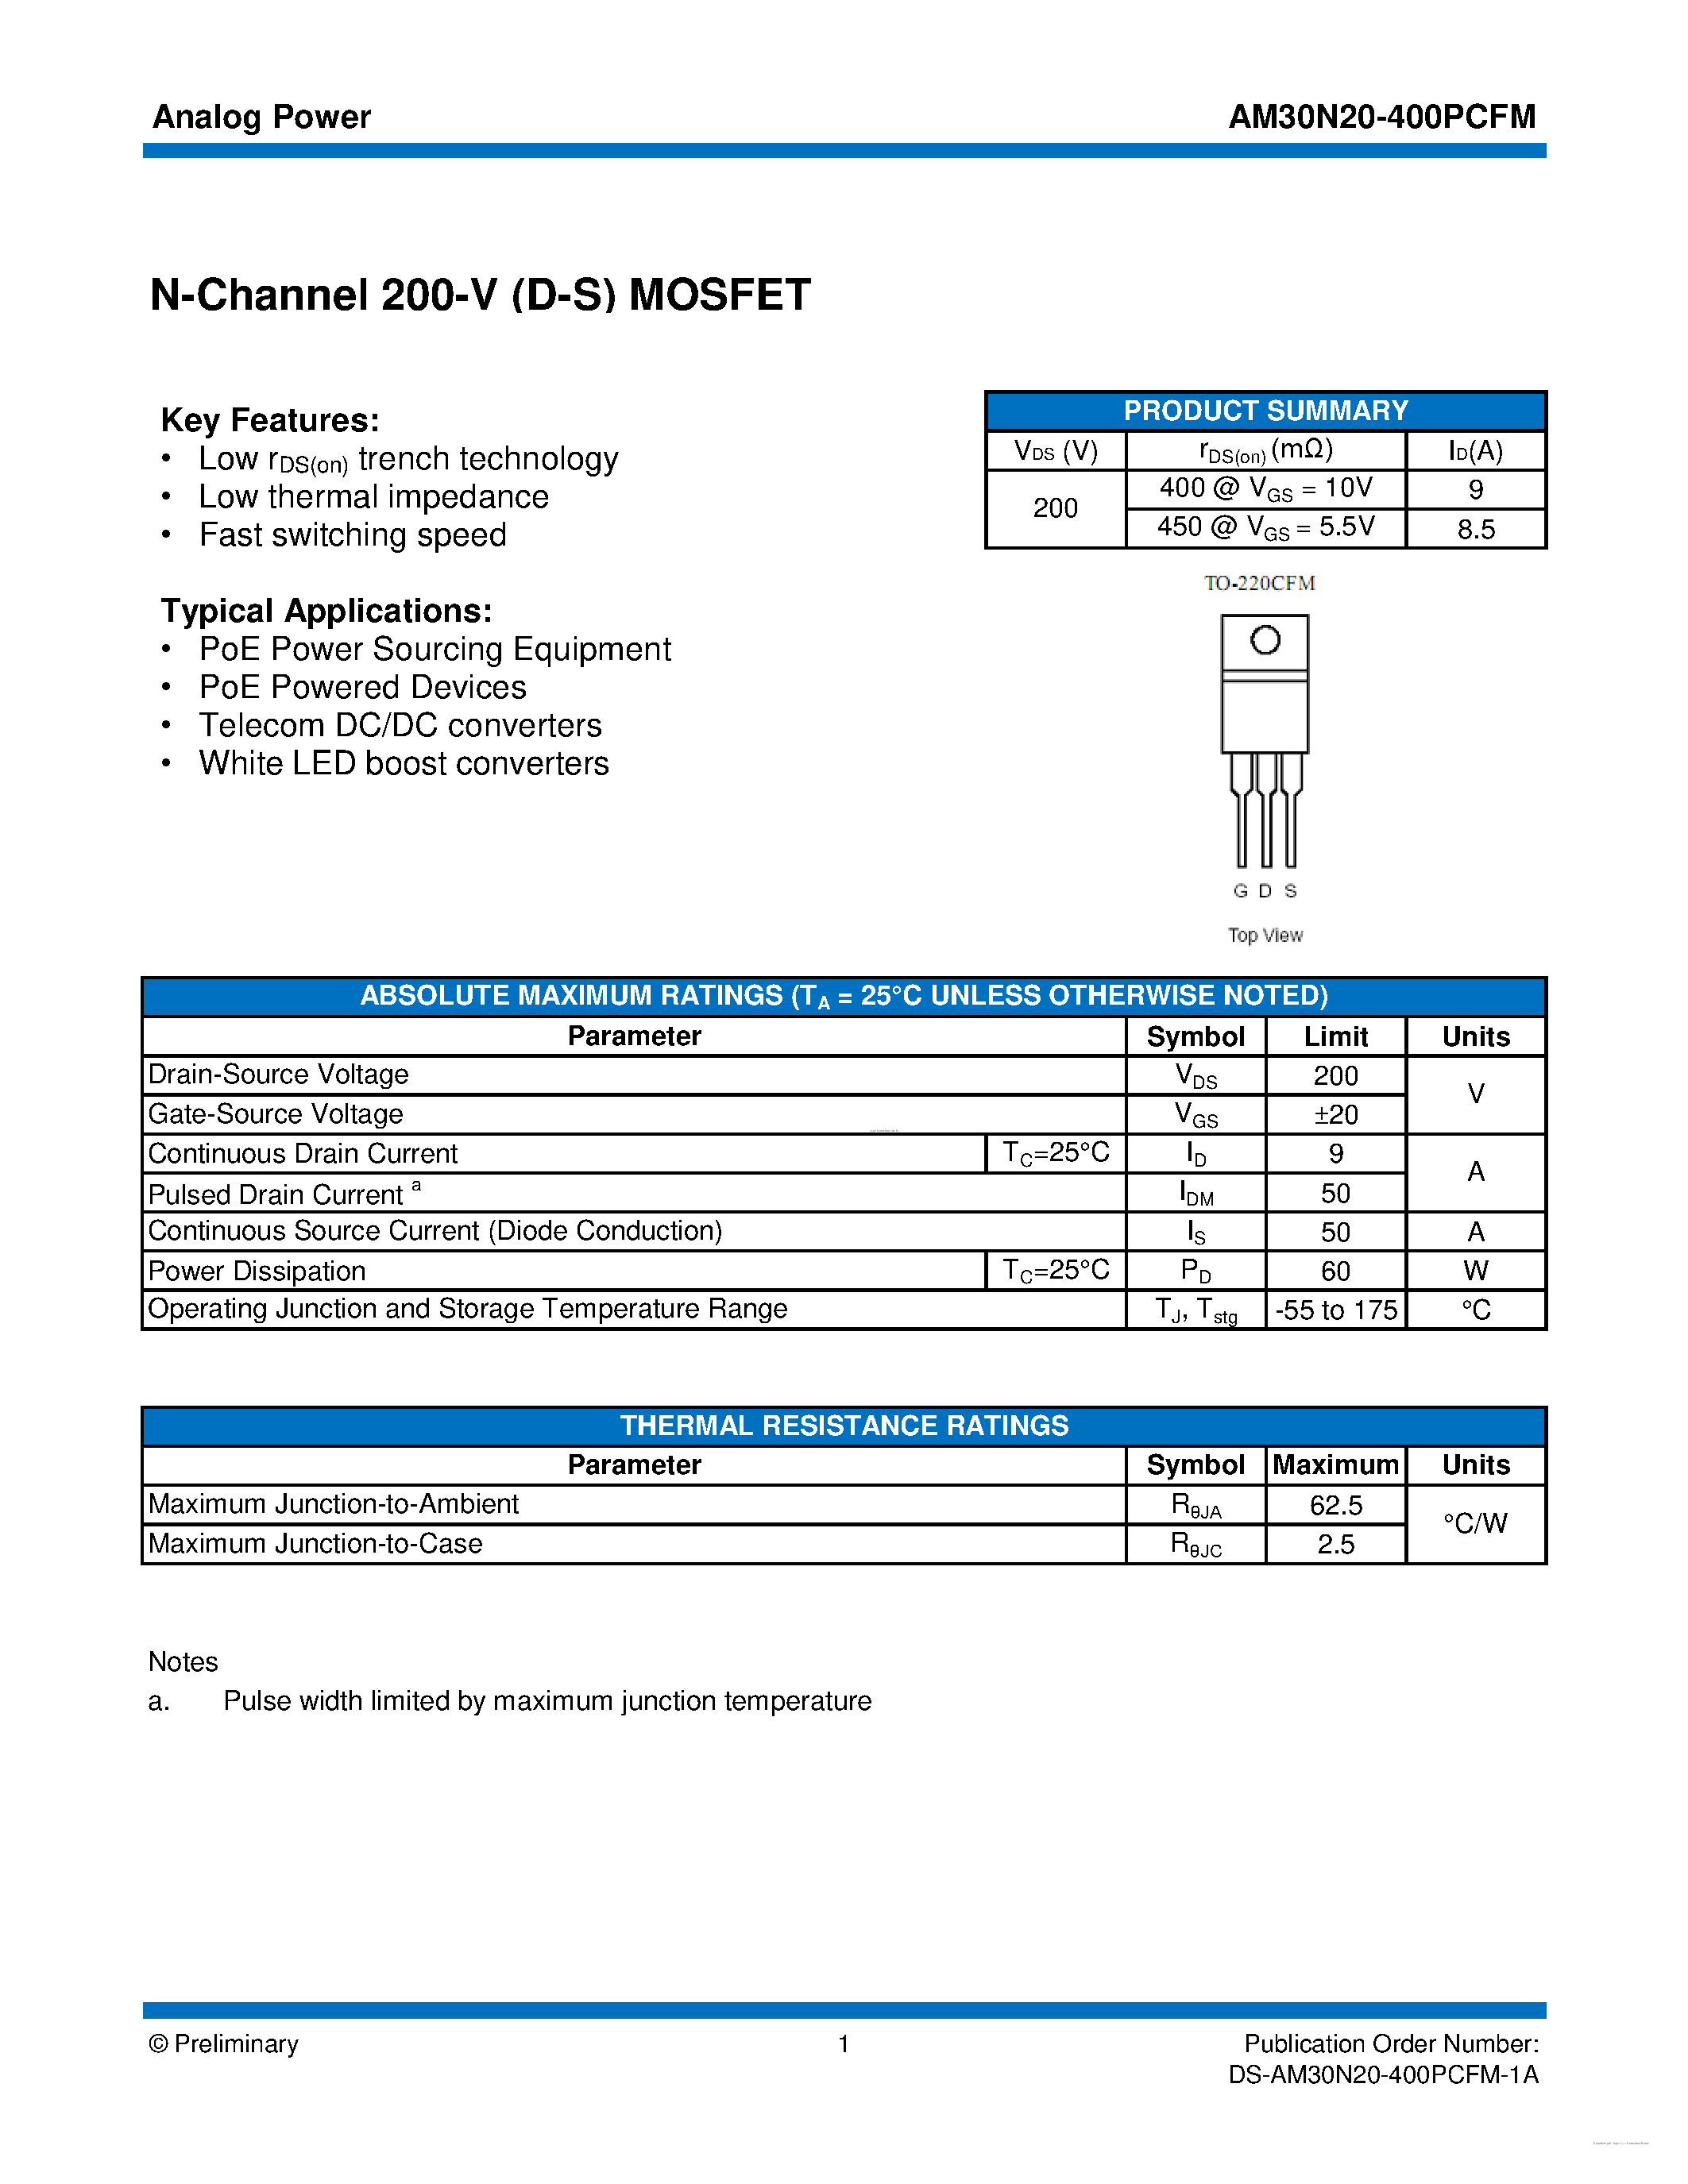 Datasheet AM30N20-400PCFM - MOSFET page 1